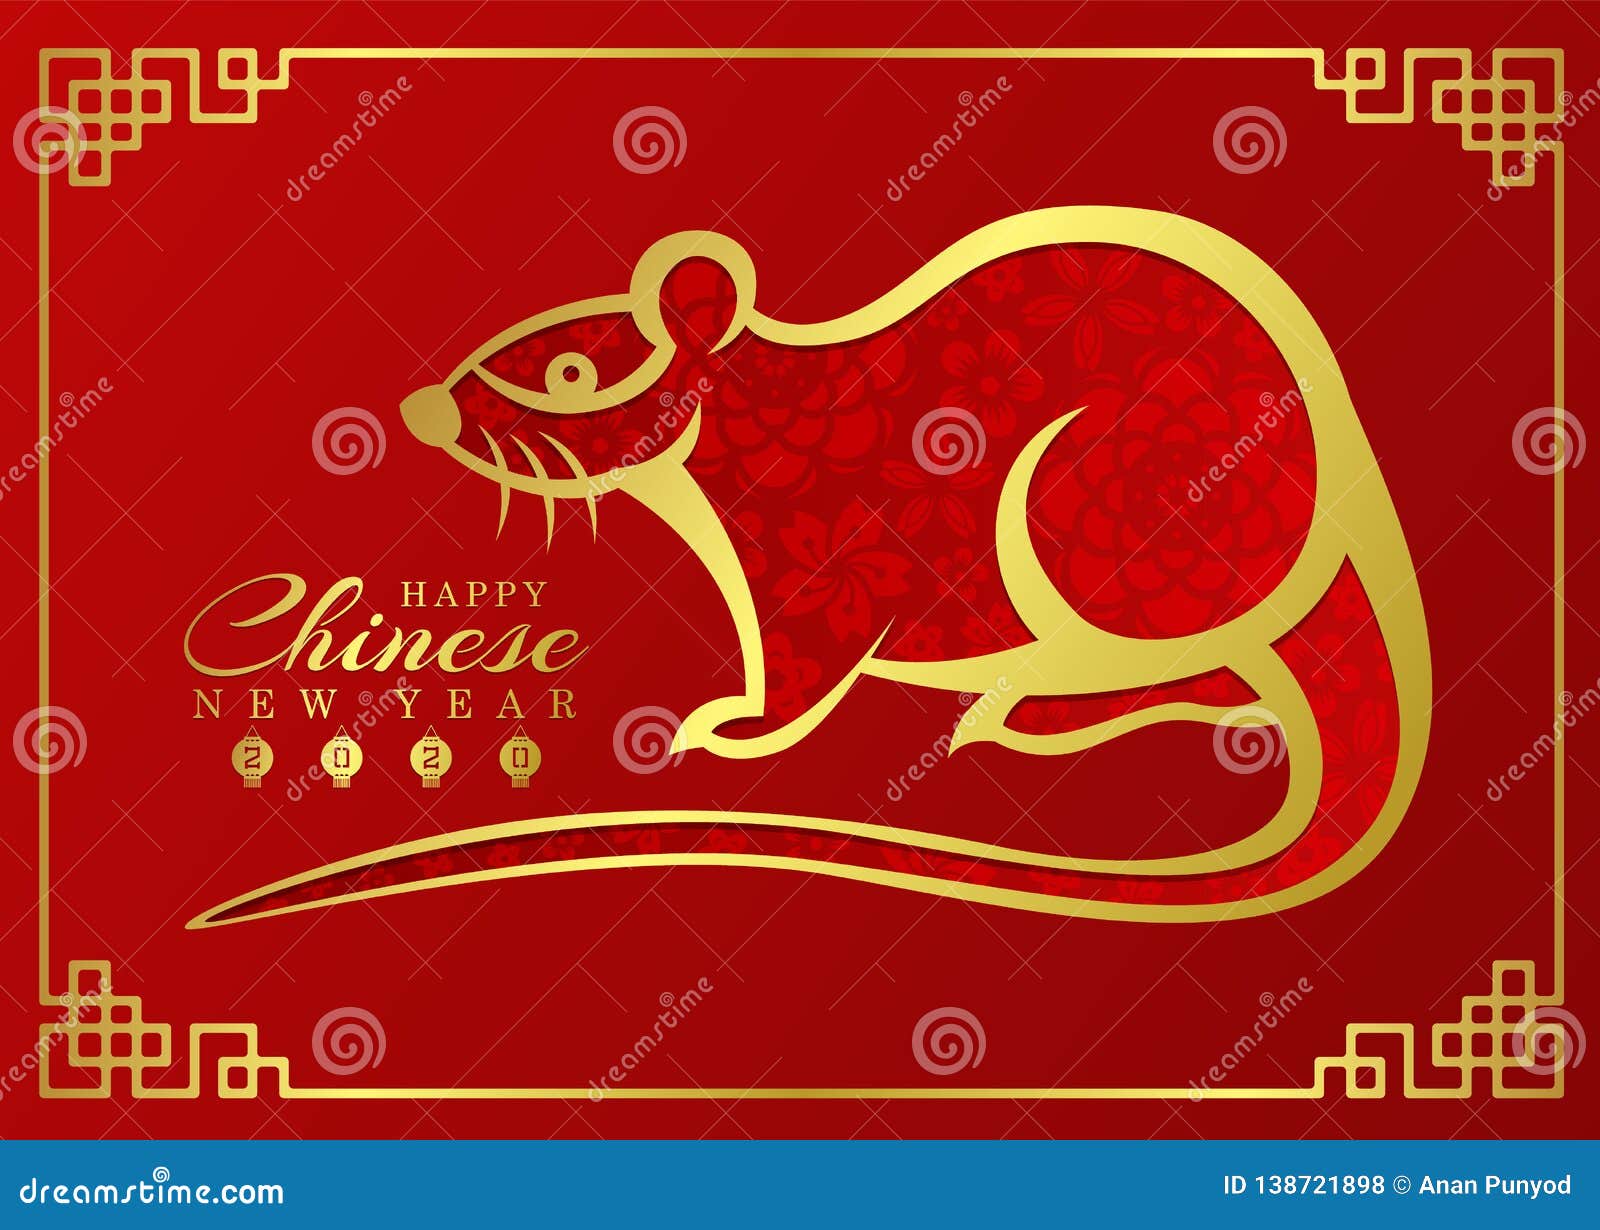 Chinese New Year 2020 Card With Abstract Gold Border Line Rat Zodiac And Abstract ...1600 x 1229